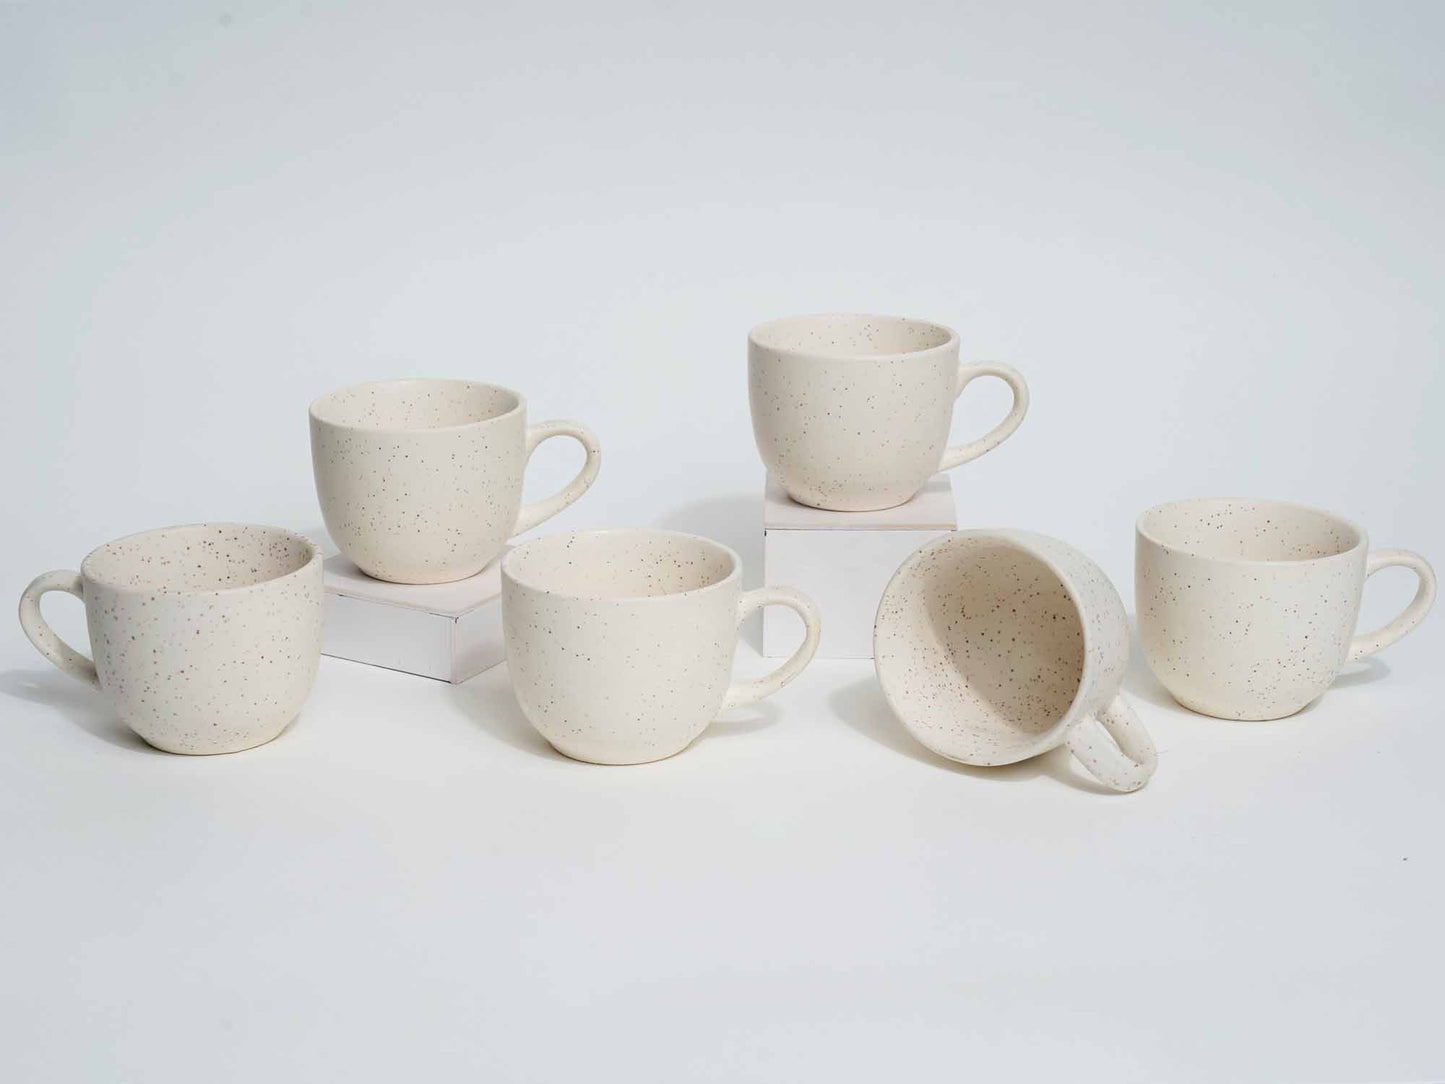 Ivory Tea Cups - Set of 2 and set of 6